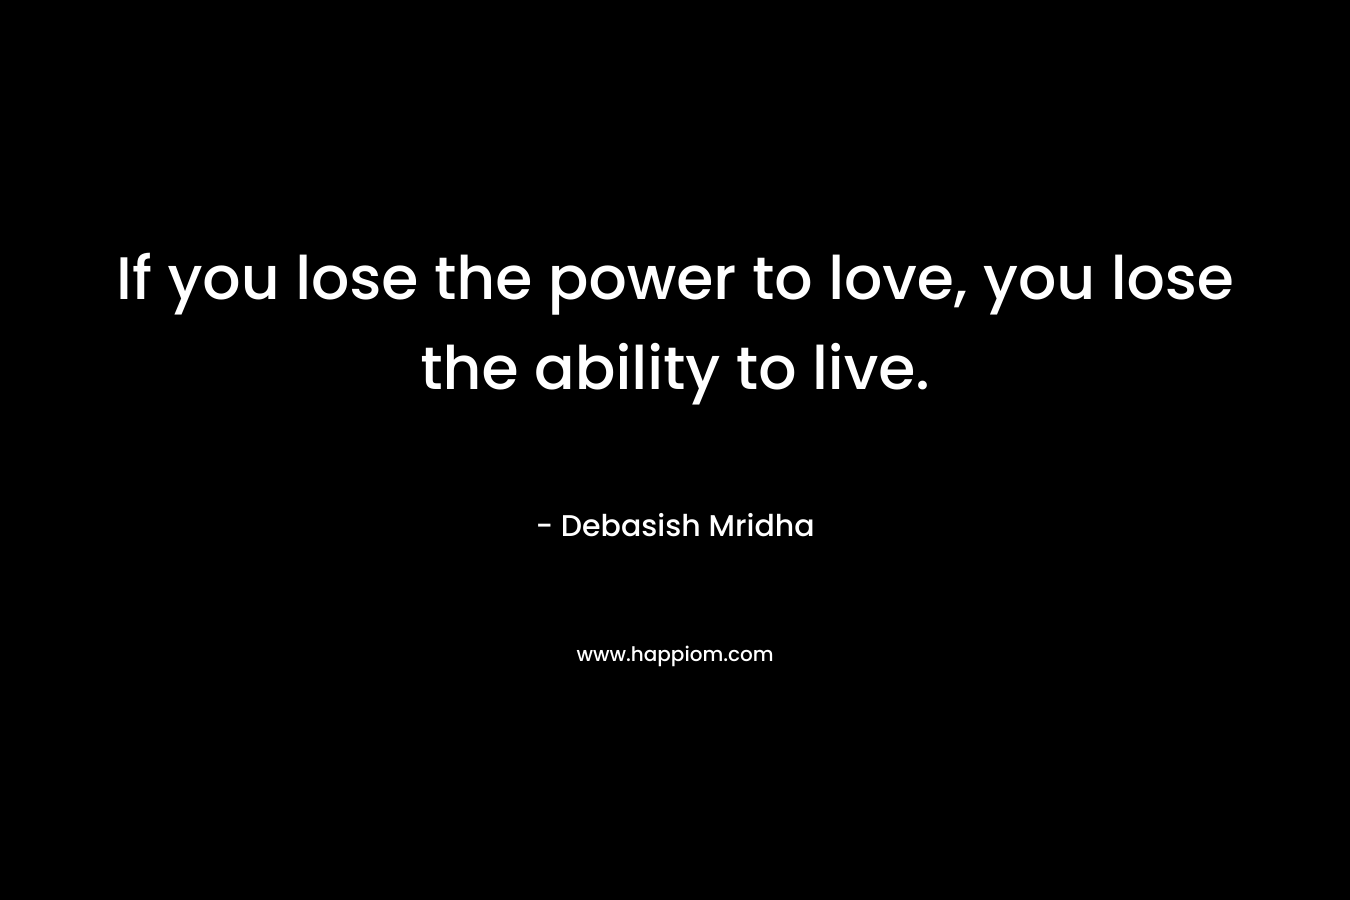 If you lose the power to love, you lose the ability to live.